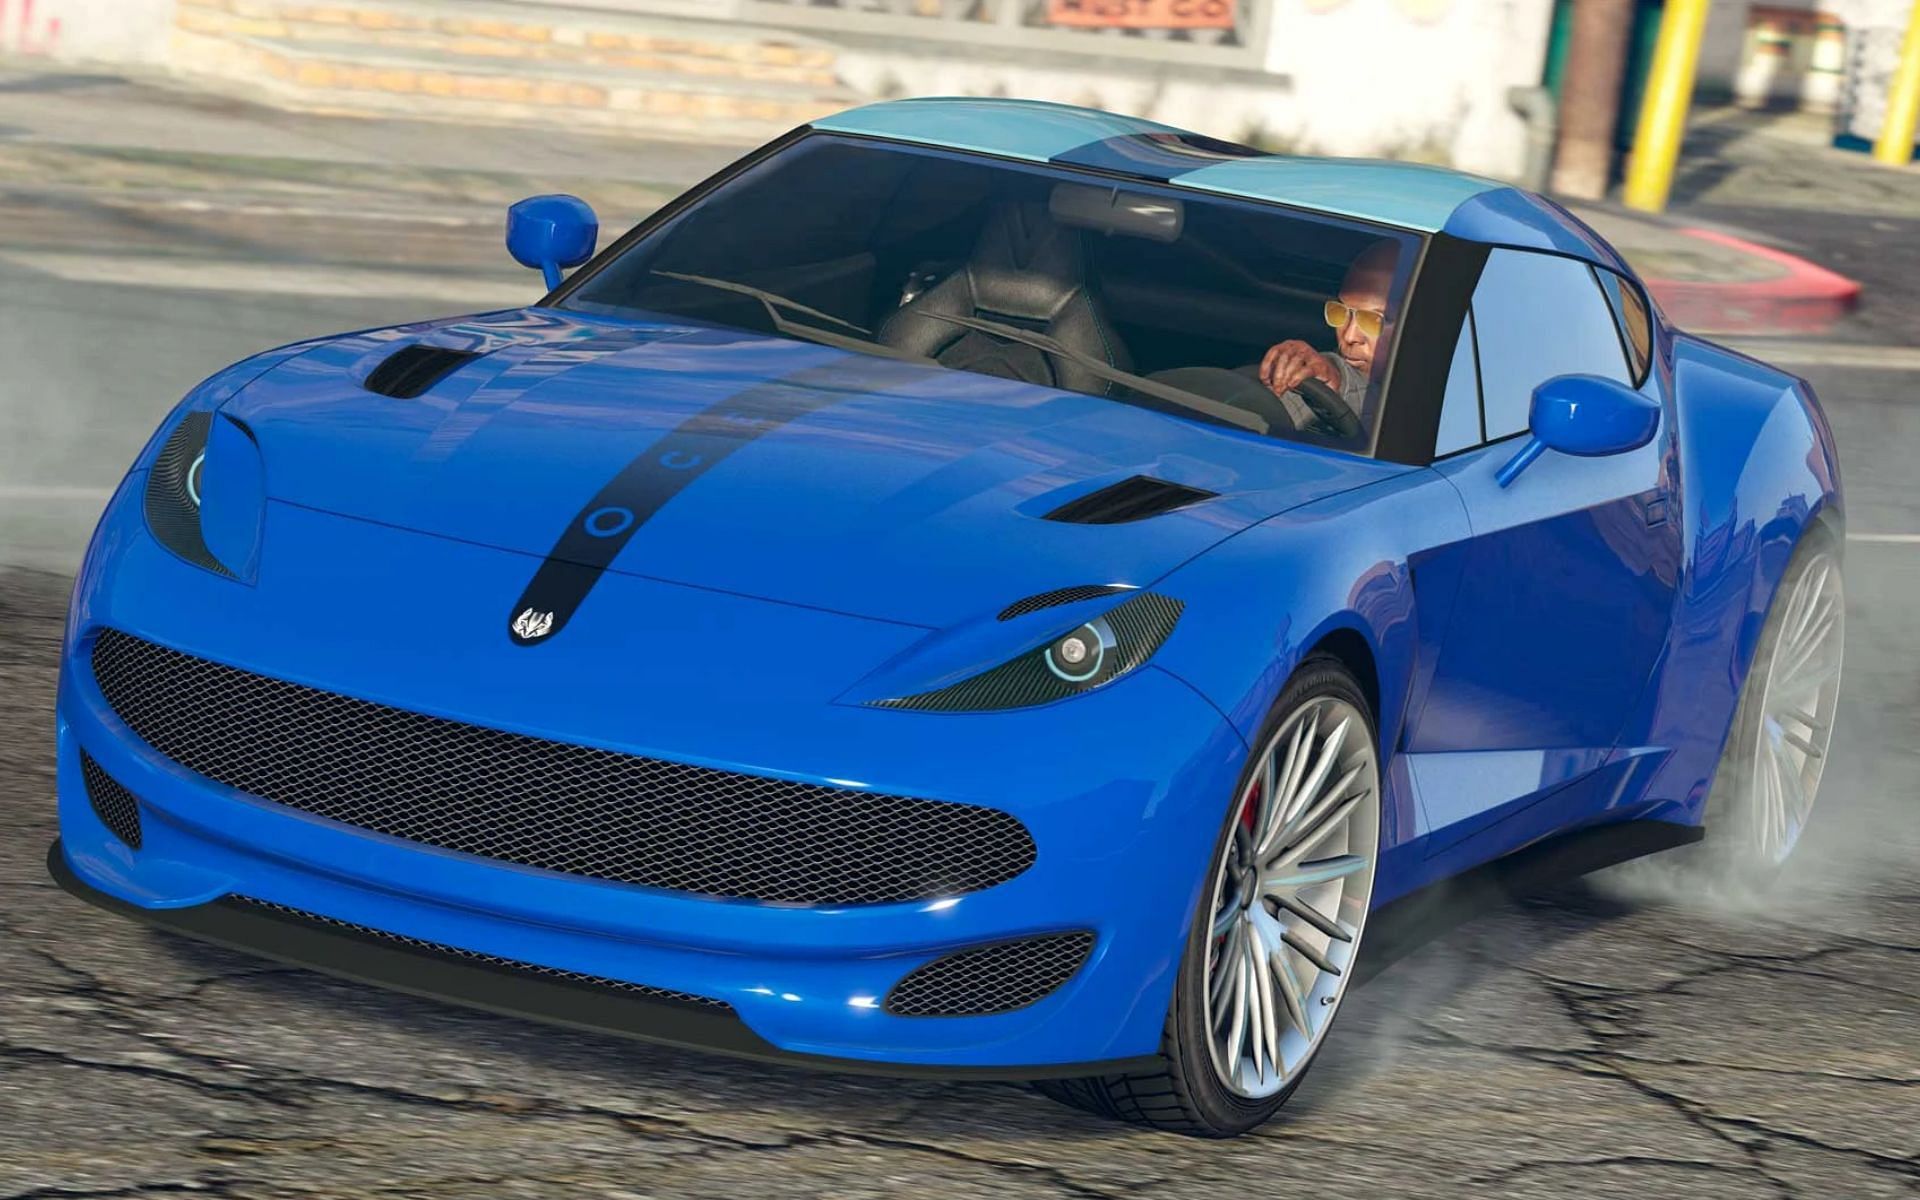 Race enthusiasts should know to respect the Pariah (Image via Rockstar Games)